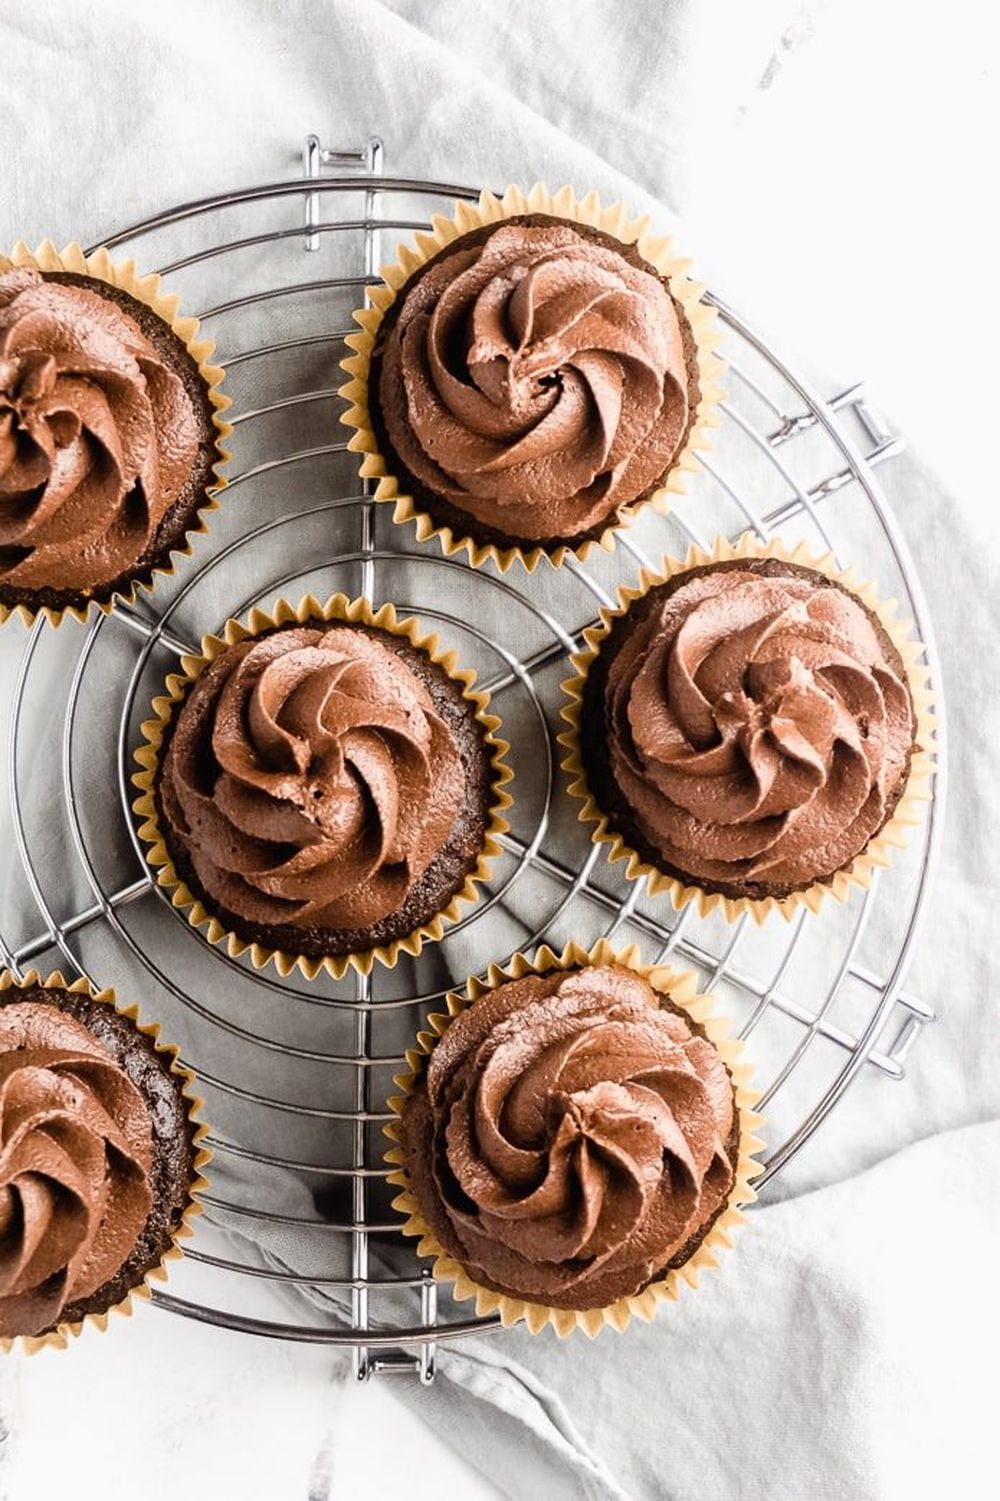 Best valentine’s day cupcakes  keto chocolate cupcakes with buttercream frosting